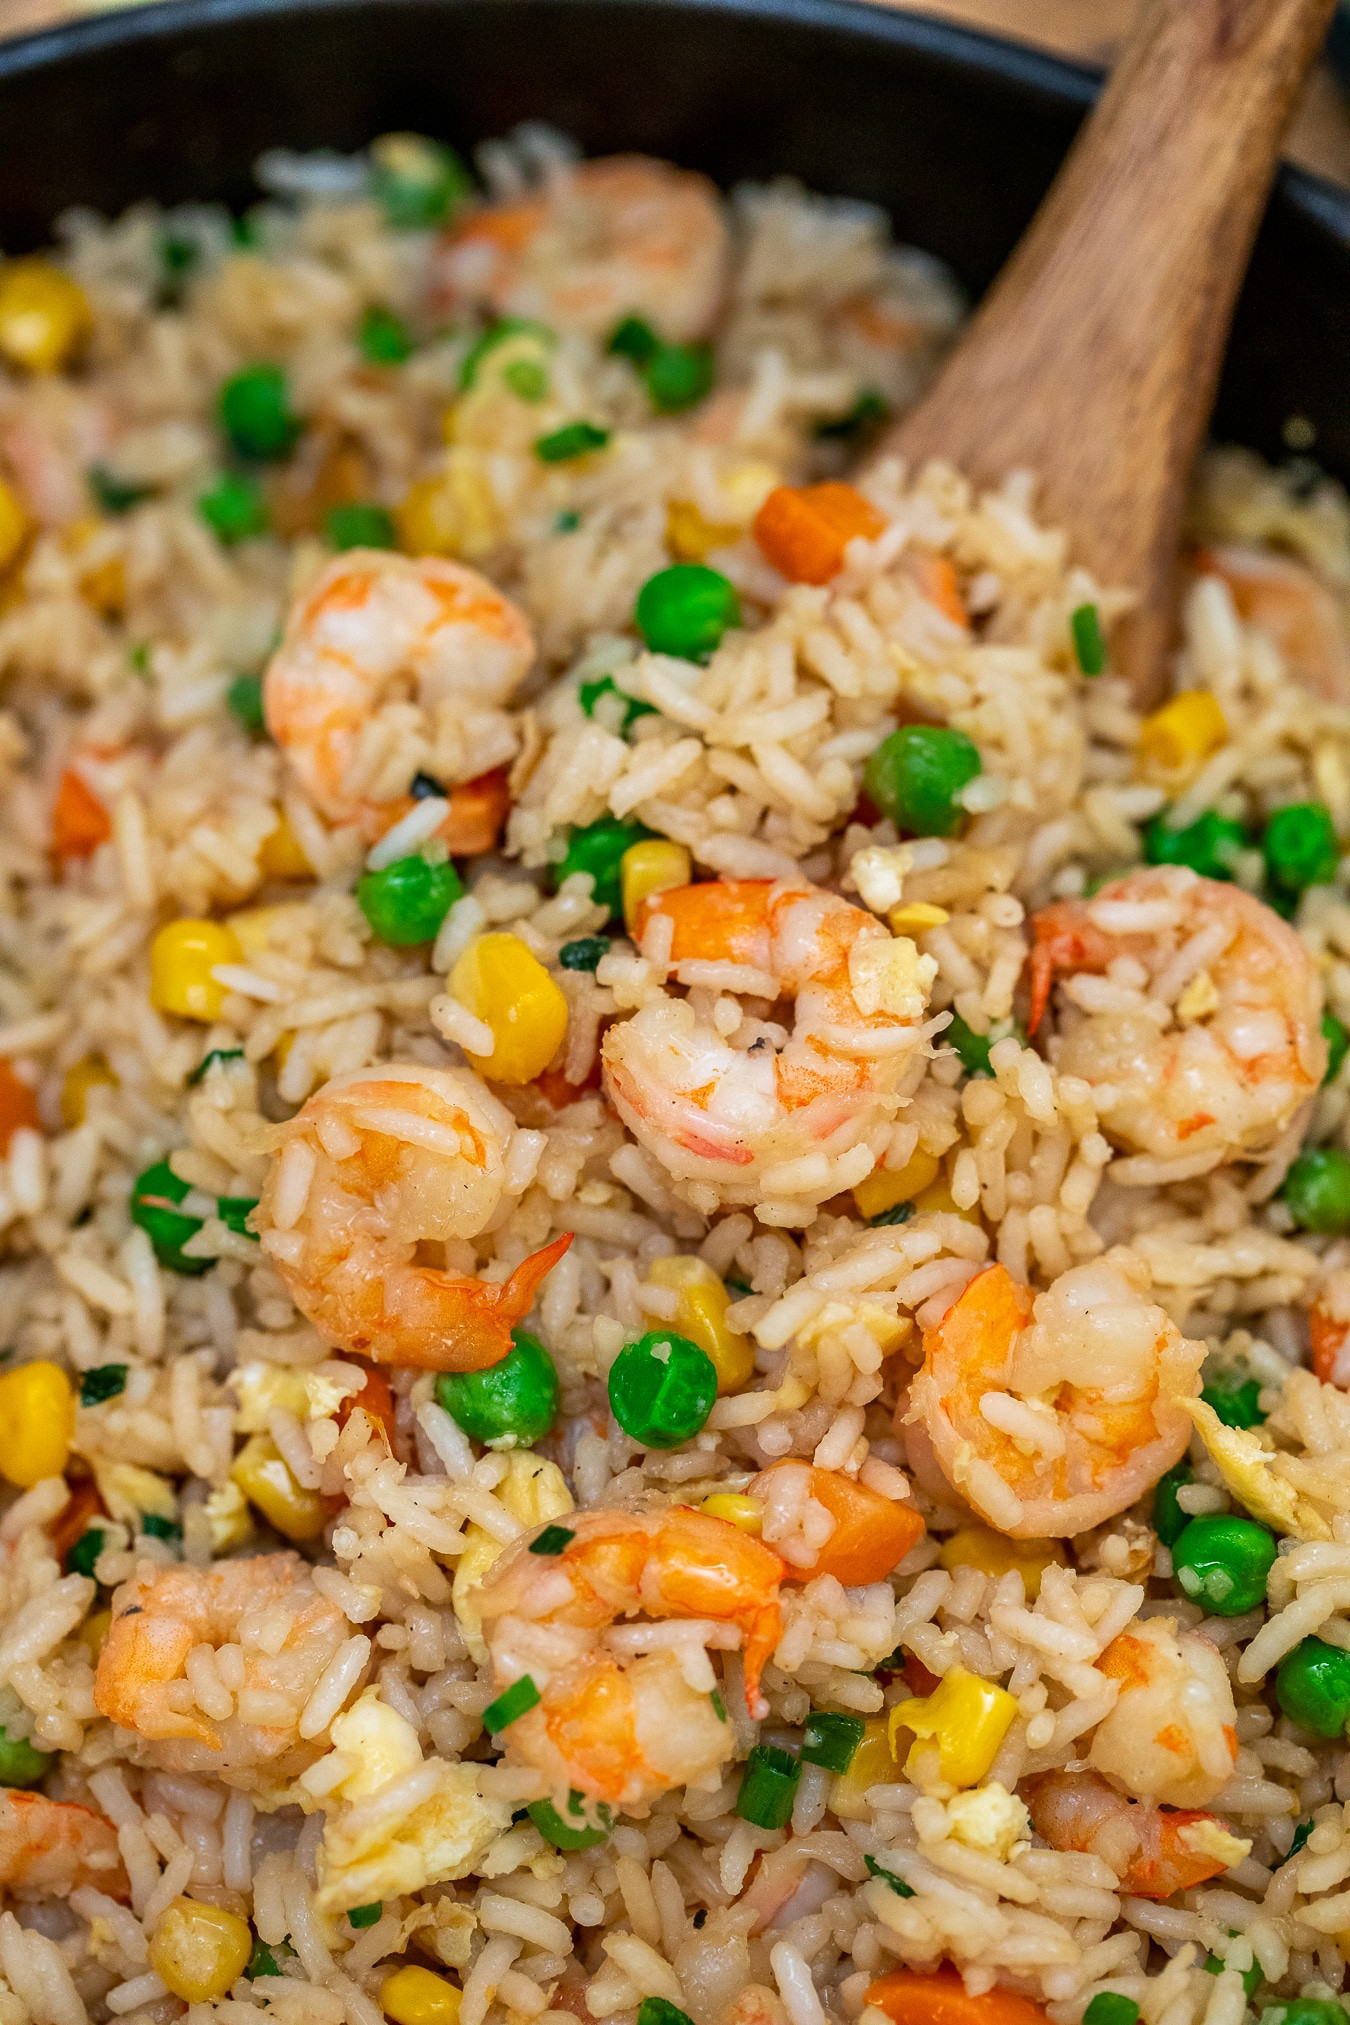 Best Shrimp Fried Rice Recipe New Shrimp Fried Rice Recipe [video] Sweet and Savory Meals